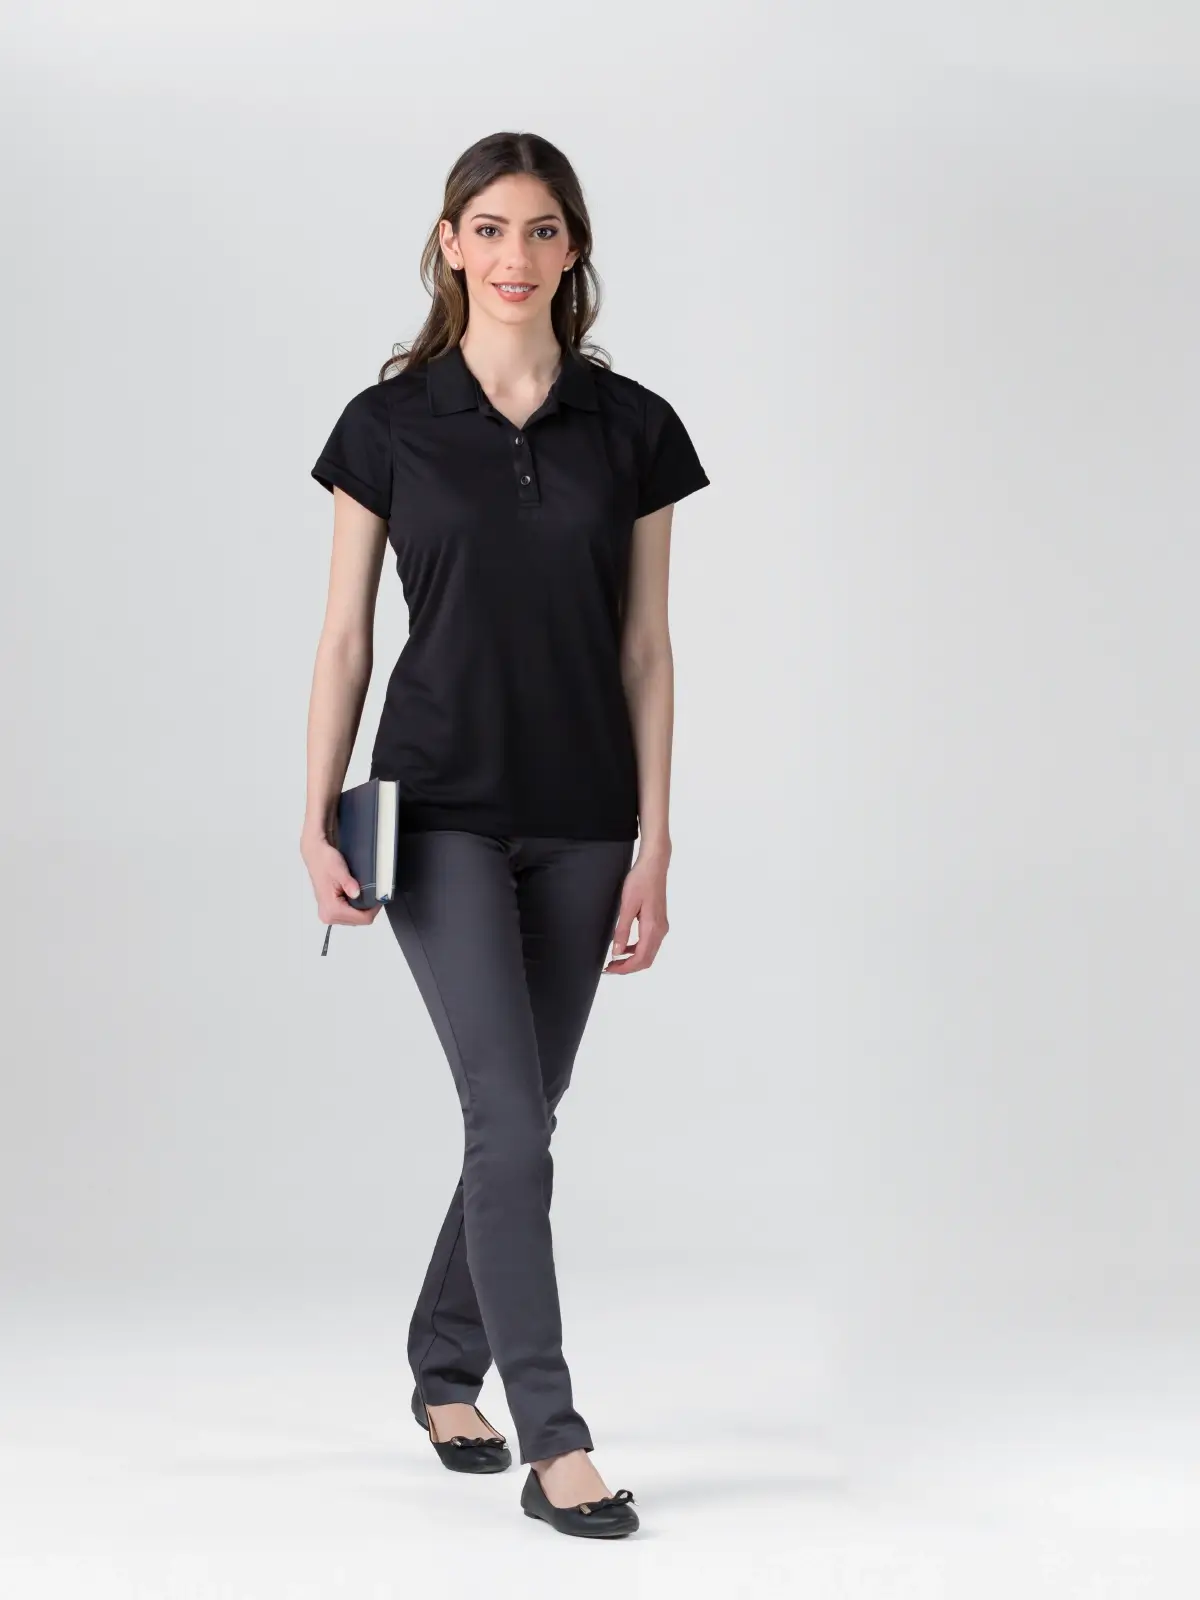 dry fit polo USA women